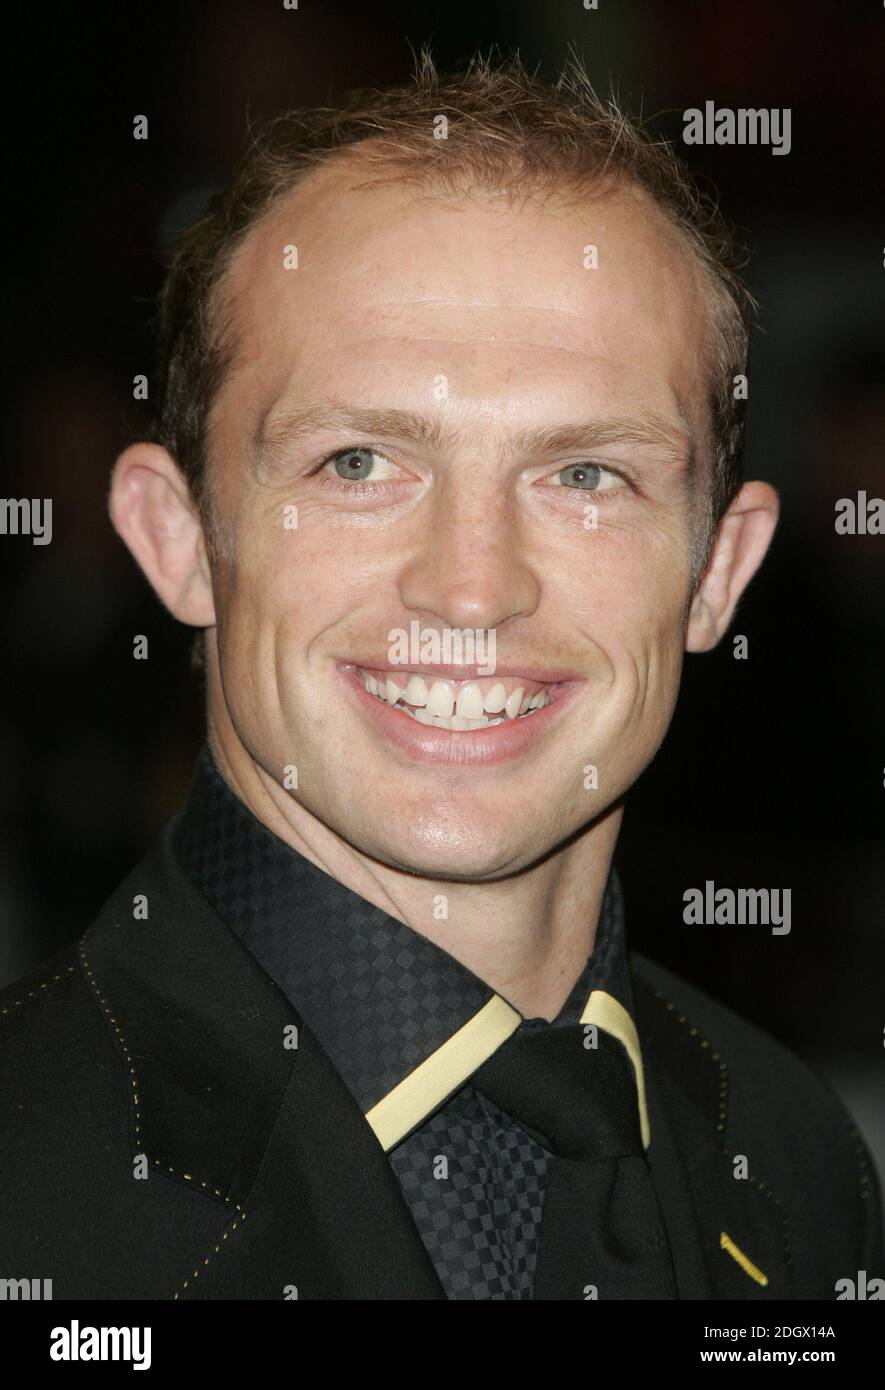 Matt Dawson arriving at the World Premiere of the new James Bond film, Casino Royale, Odeon Cinema, Leicester Square, central London, November 14, 2006. Stock Photo